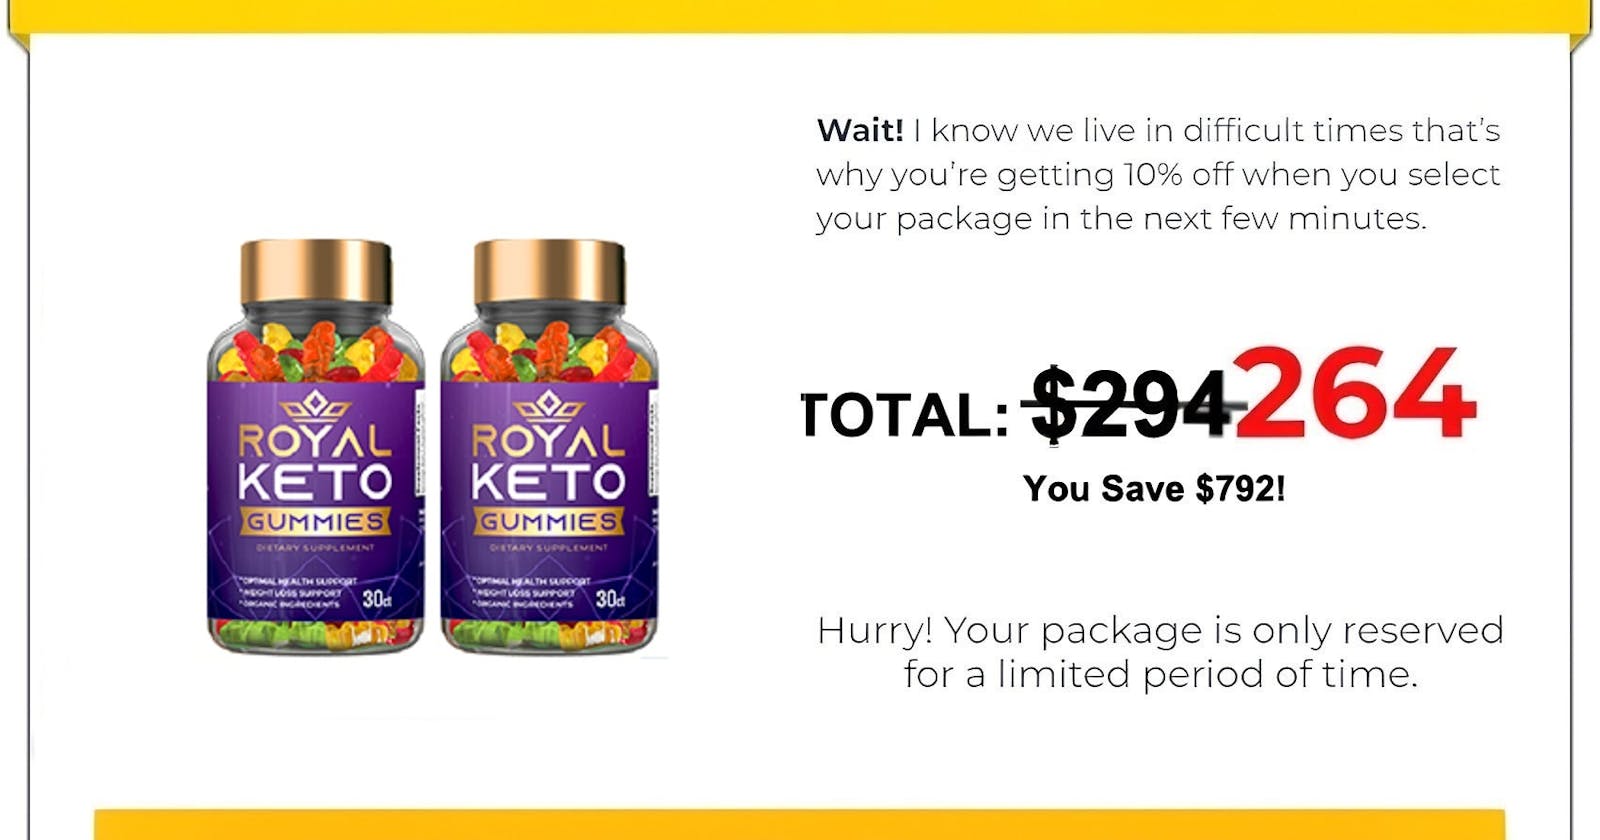 Royal Keto Gummies UK: The Delicious Way to Support Ketosis!